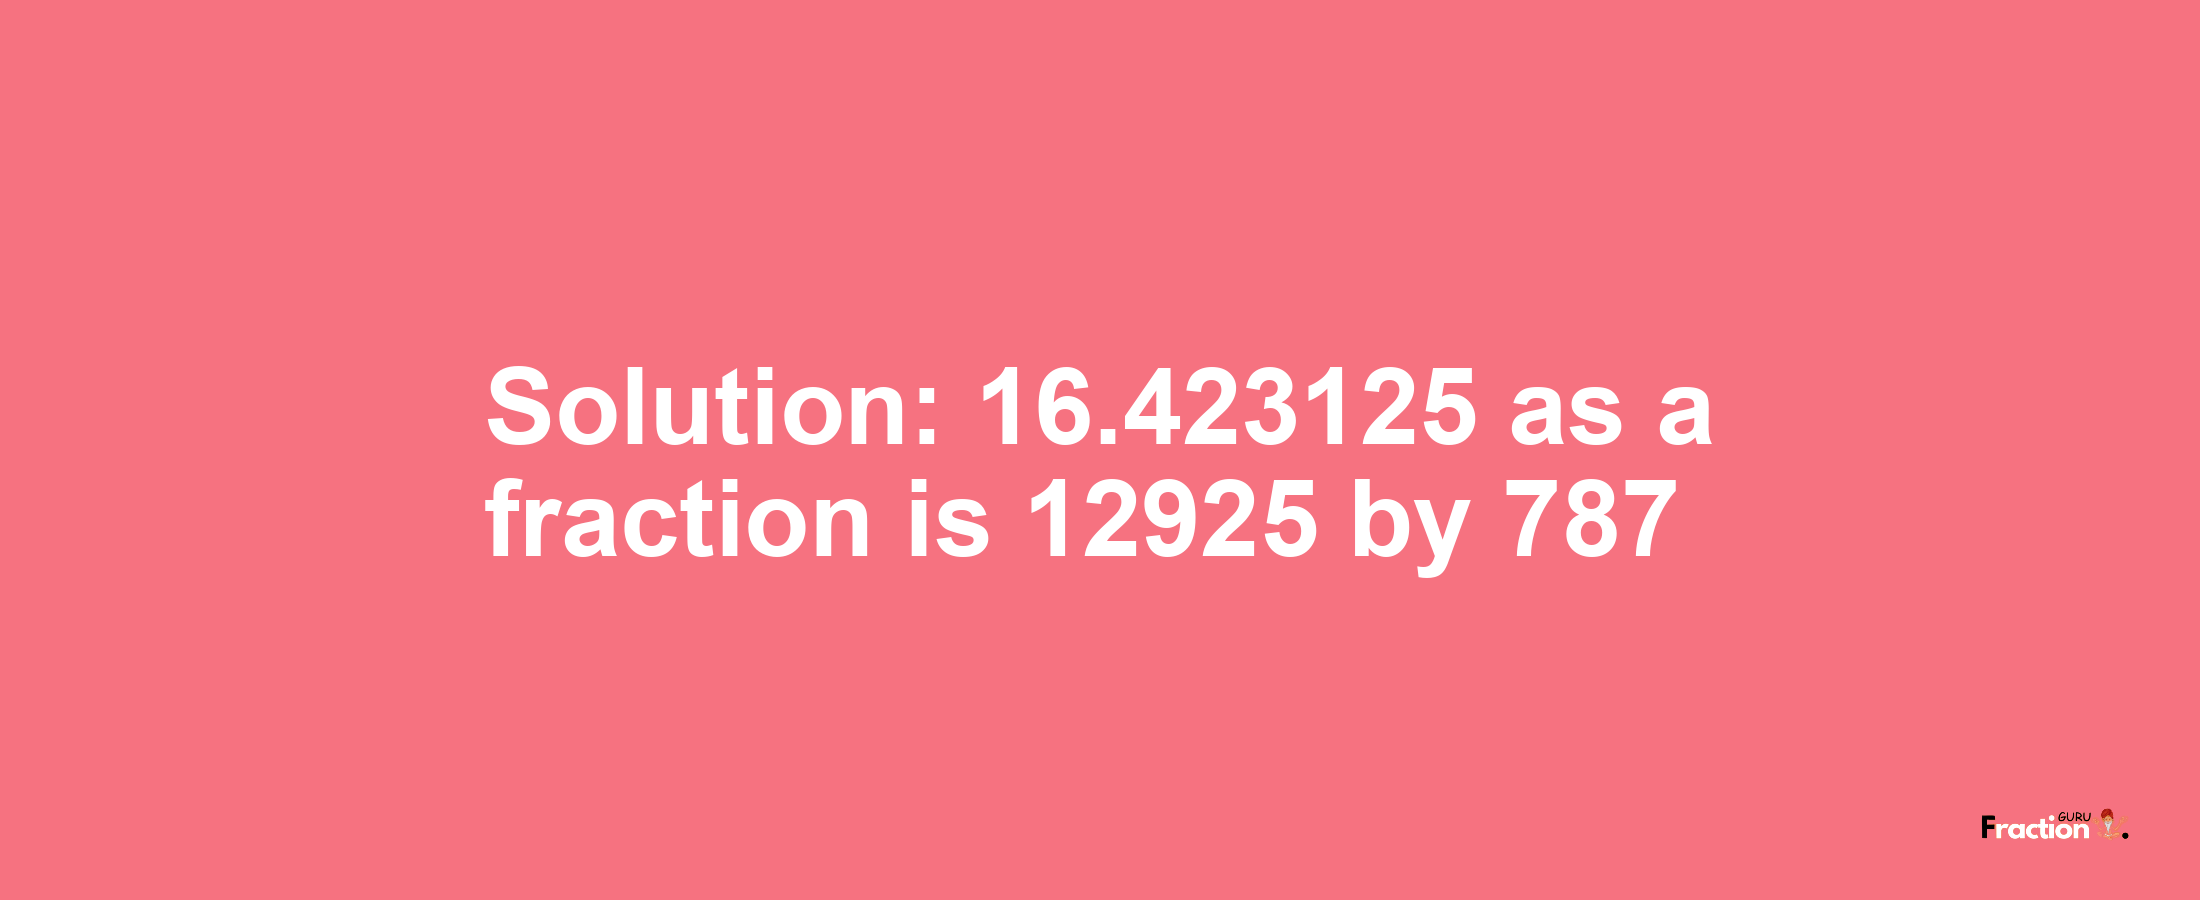 Solution:16.423125 as a fraction is 12925/787